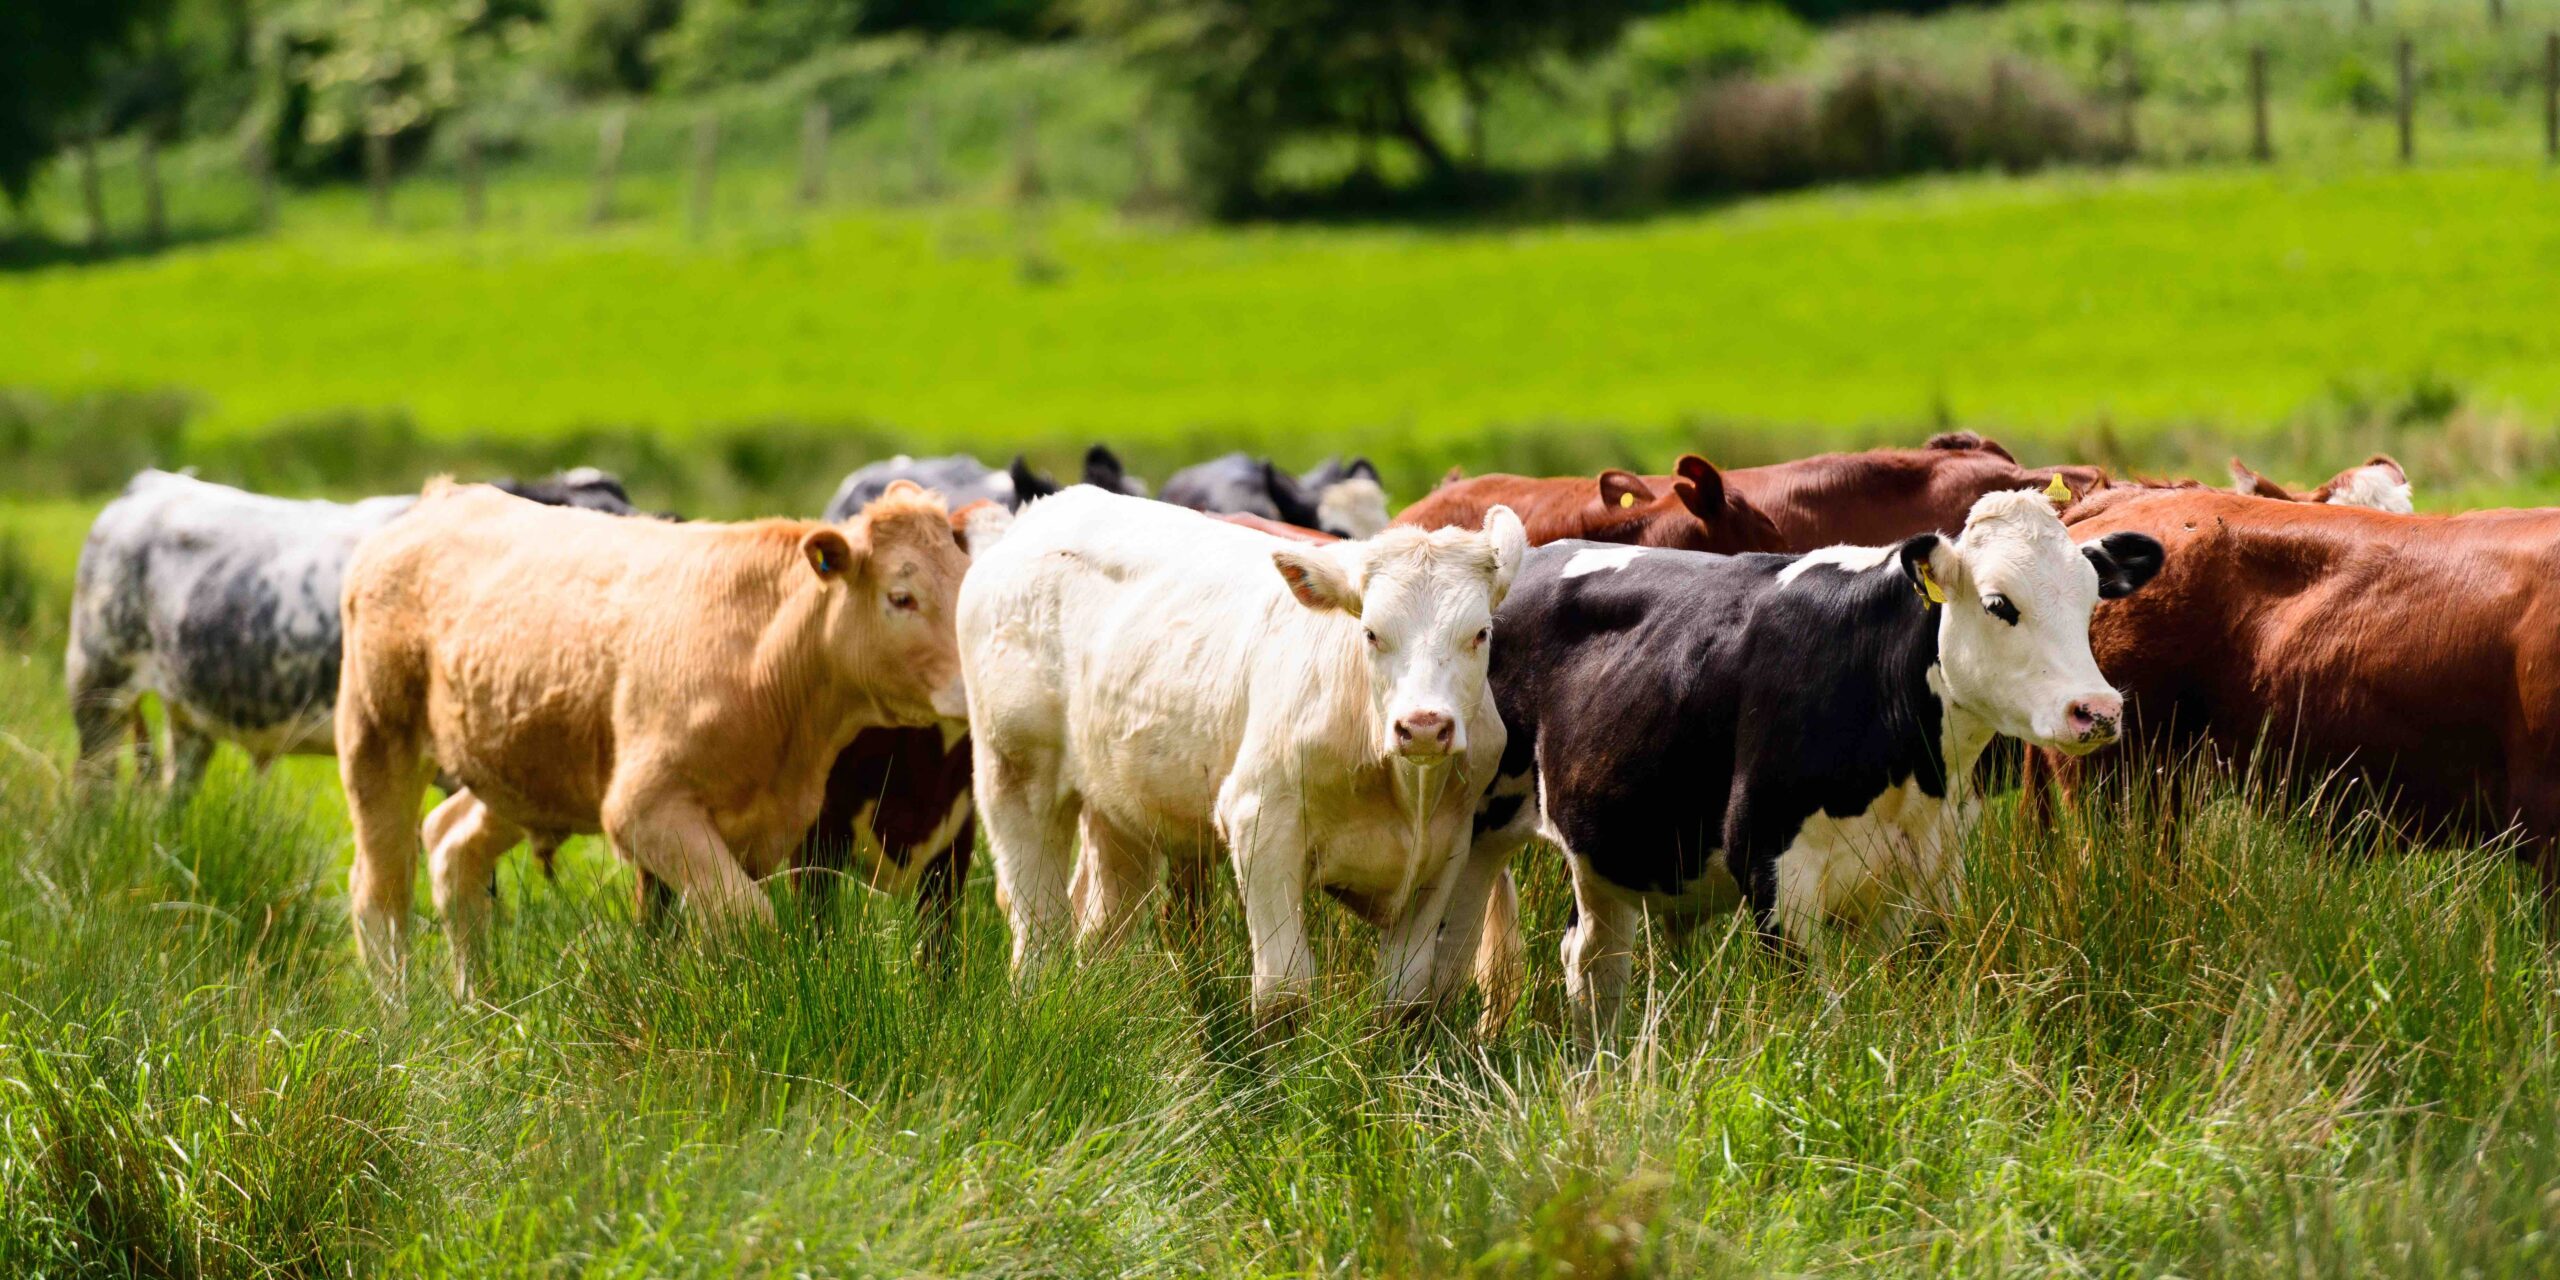 Mixed Impacts of H5N1 in Dairy Cows on Dairy and Beef Cattle Markets